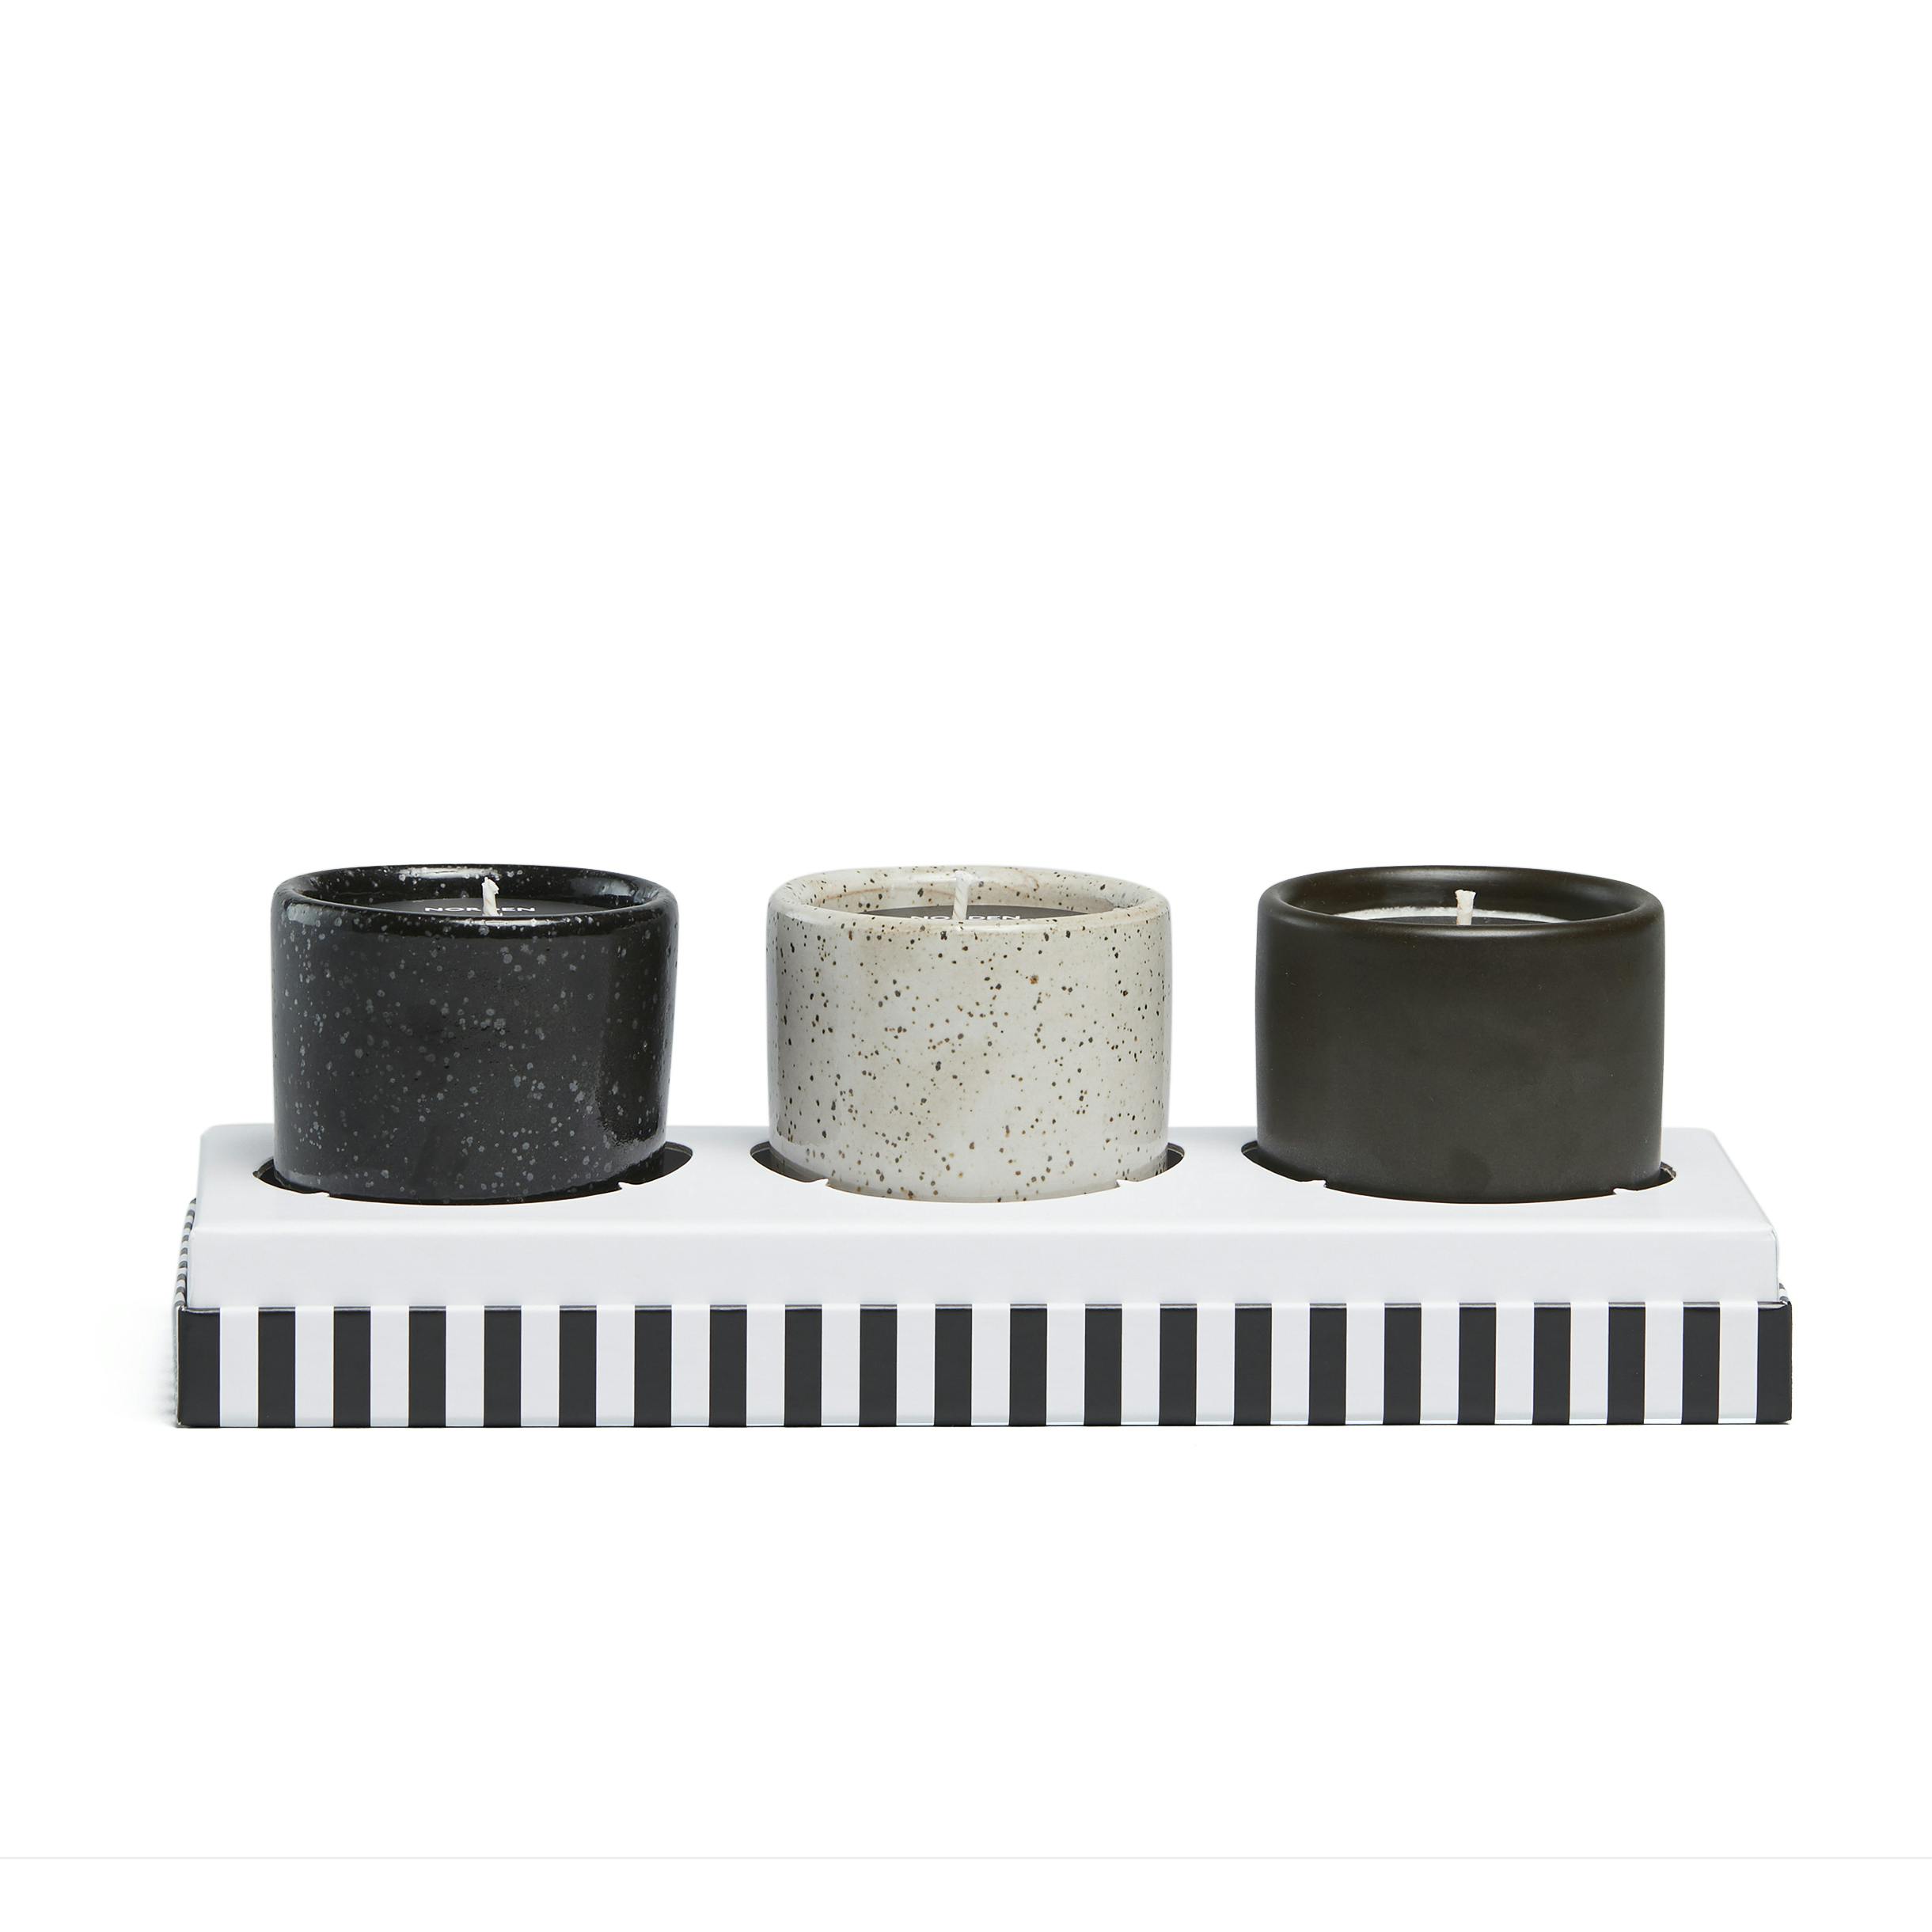 Norden 3 Candle Gift Box Set